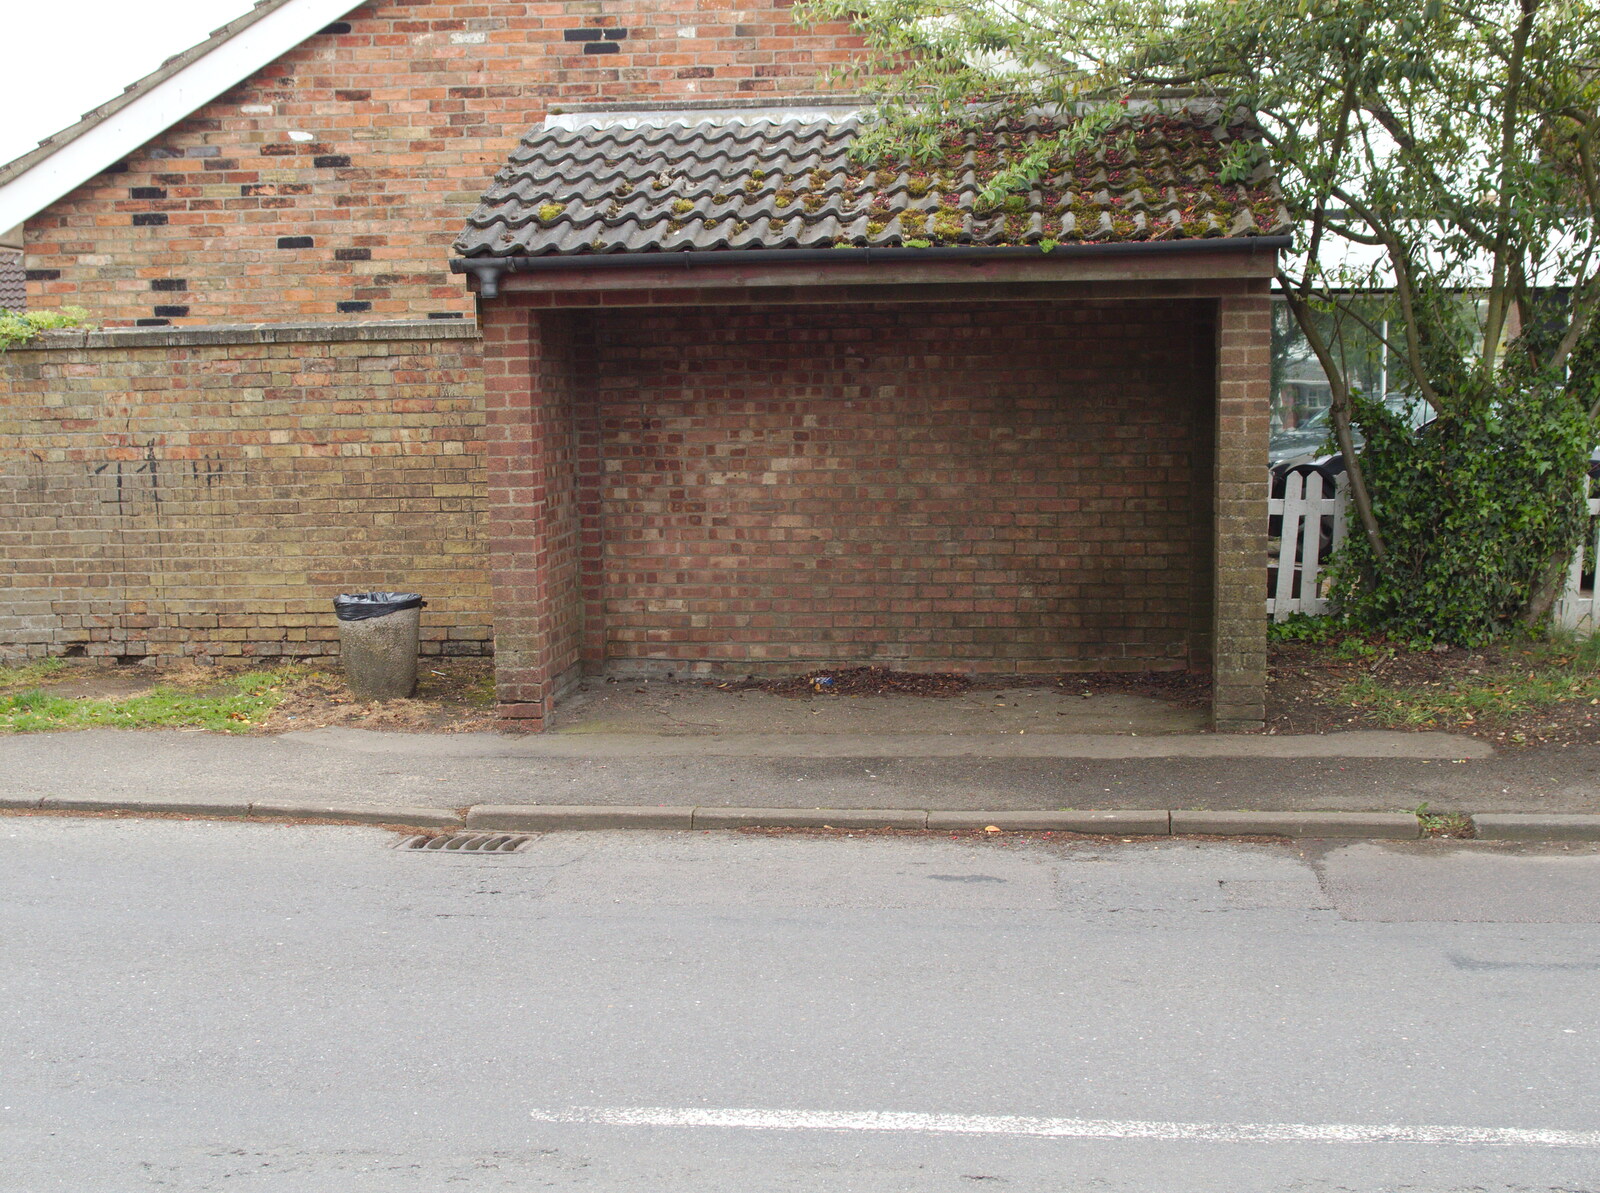 A brutalist form of bus shelter from A Return to Bedford: the BSCC Annual Weekend Away, Shefford, Bedfordshire - 10th May 2014